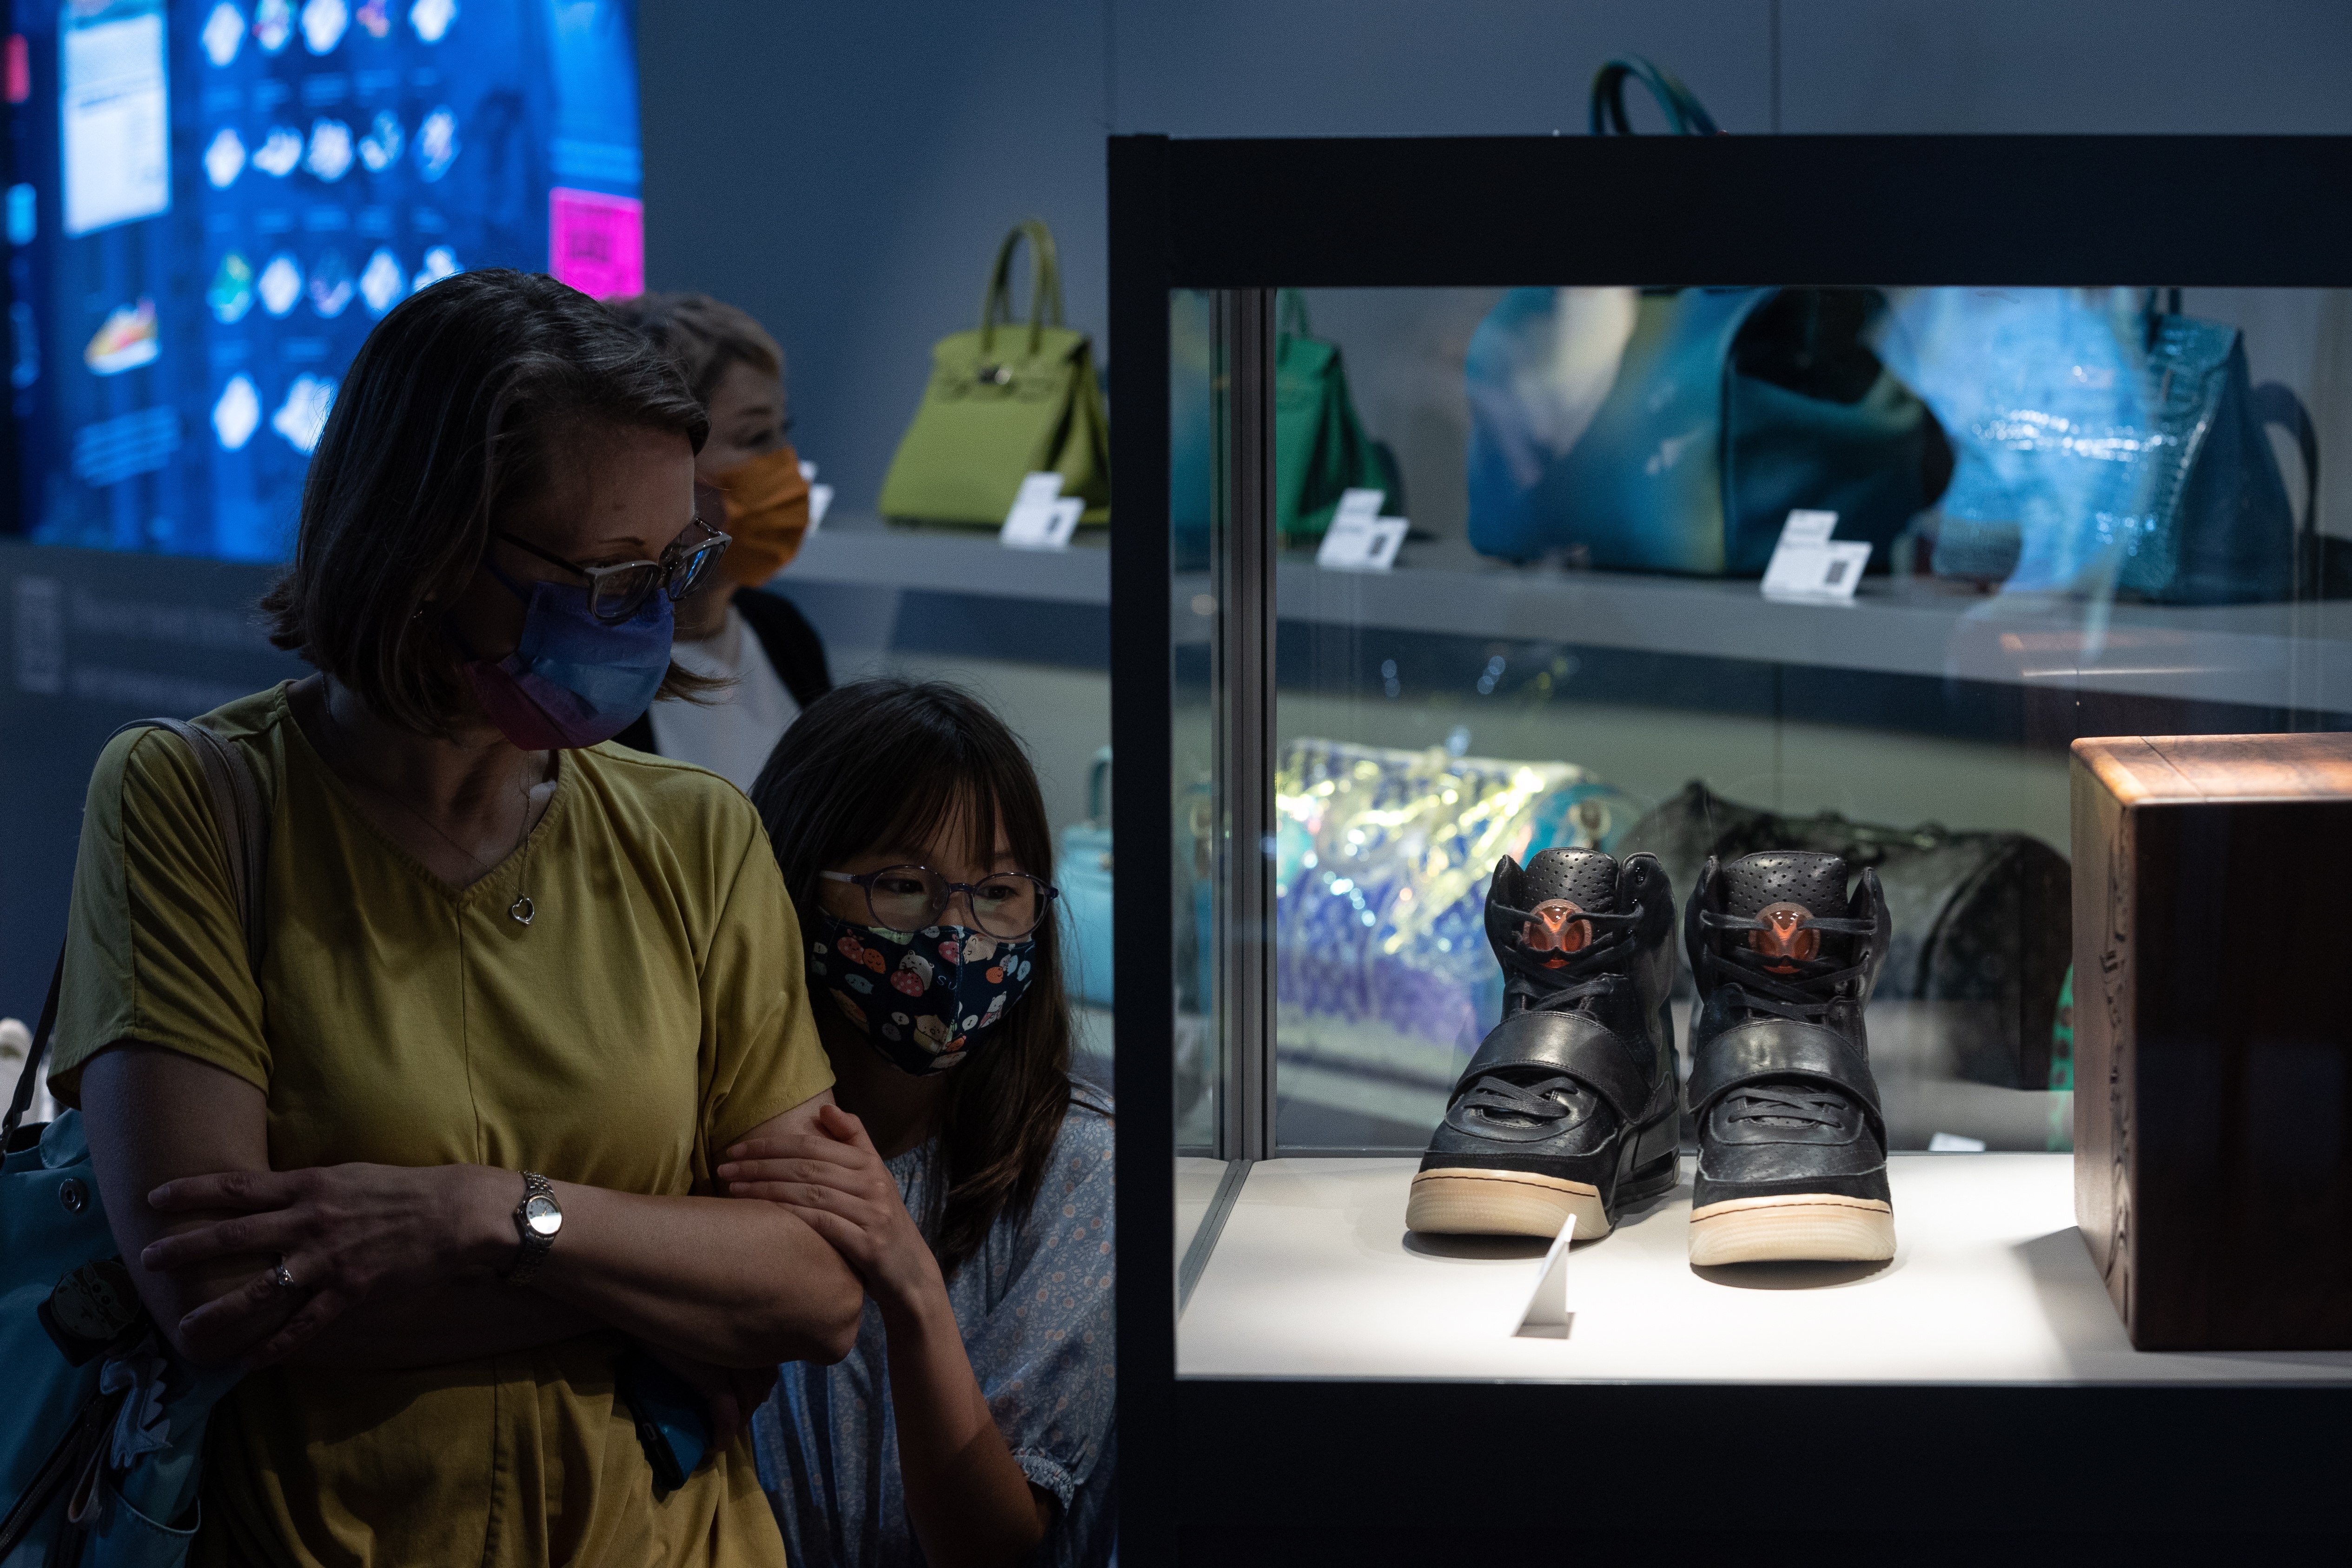 Visitors look at Kanye West’s Grammy-worn Nike Air Yeezy 1 Prototype sneakers on display during a Sothebys auction preview in Hong Kong on April 17. Photo: EPA-EFE